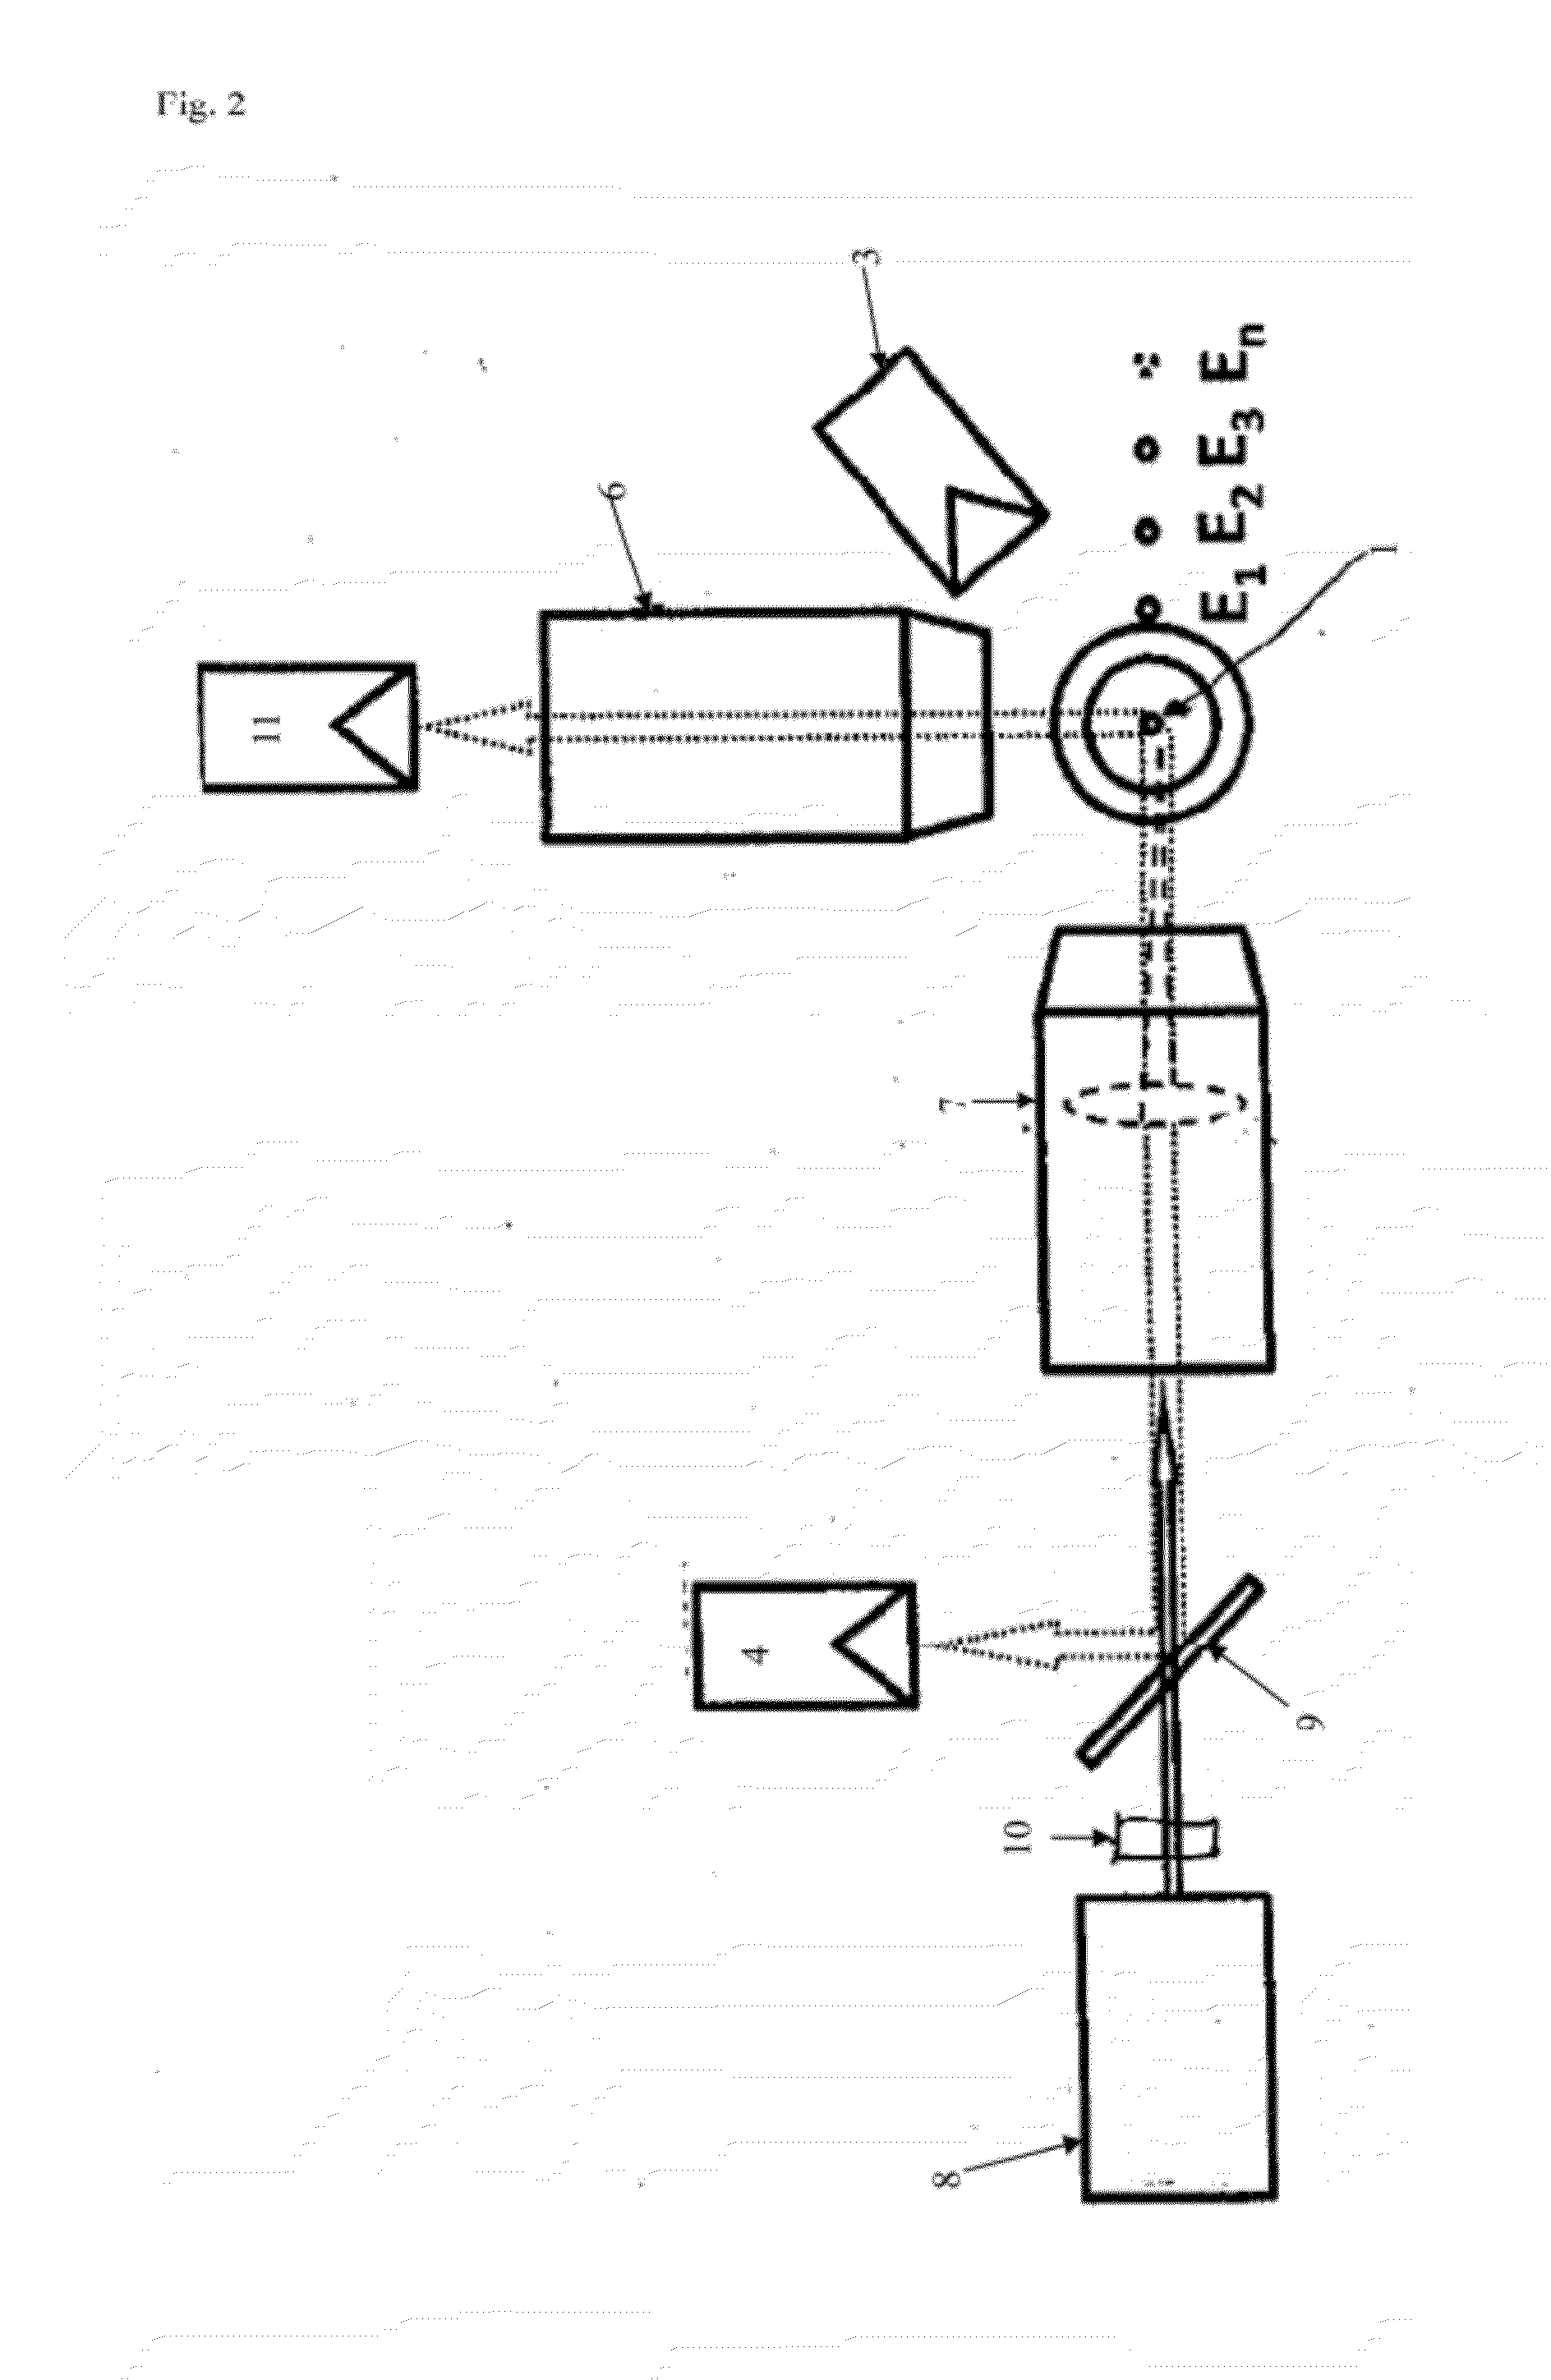 Apparatus and method for selecting particles